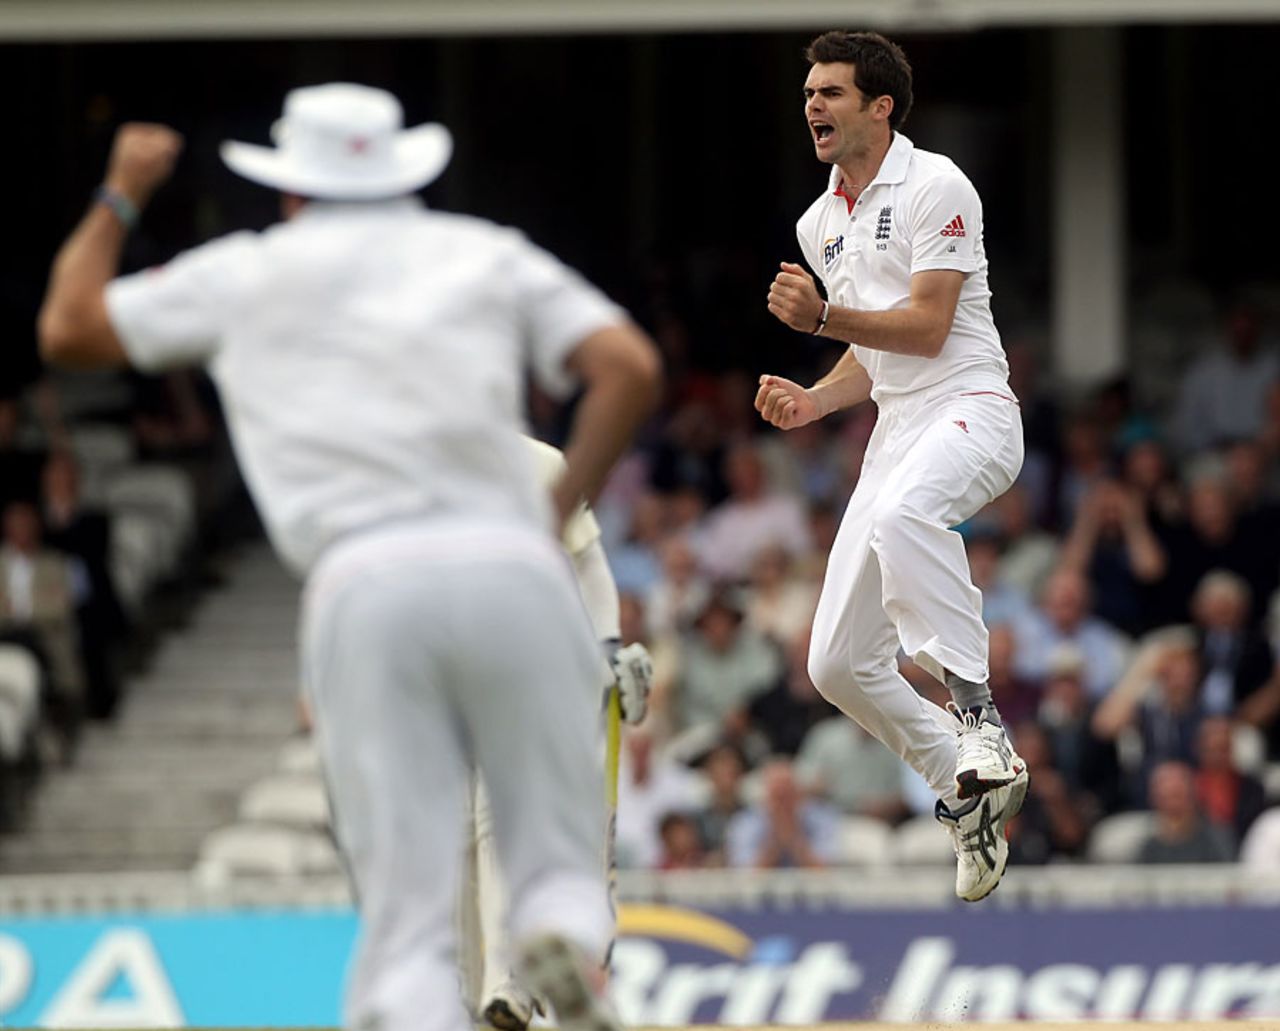 James Anderson struck early to remove Yasir Hameed, England v Pakistan, 3rd Test, The Oval, August 21, 2010